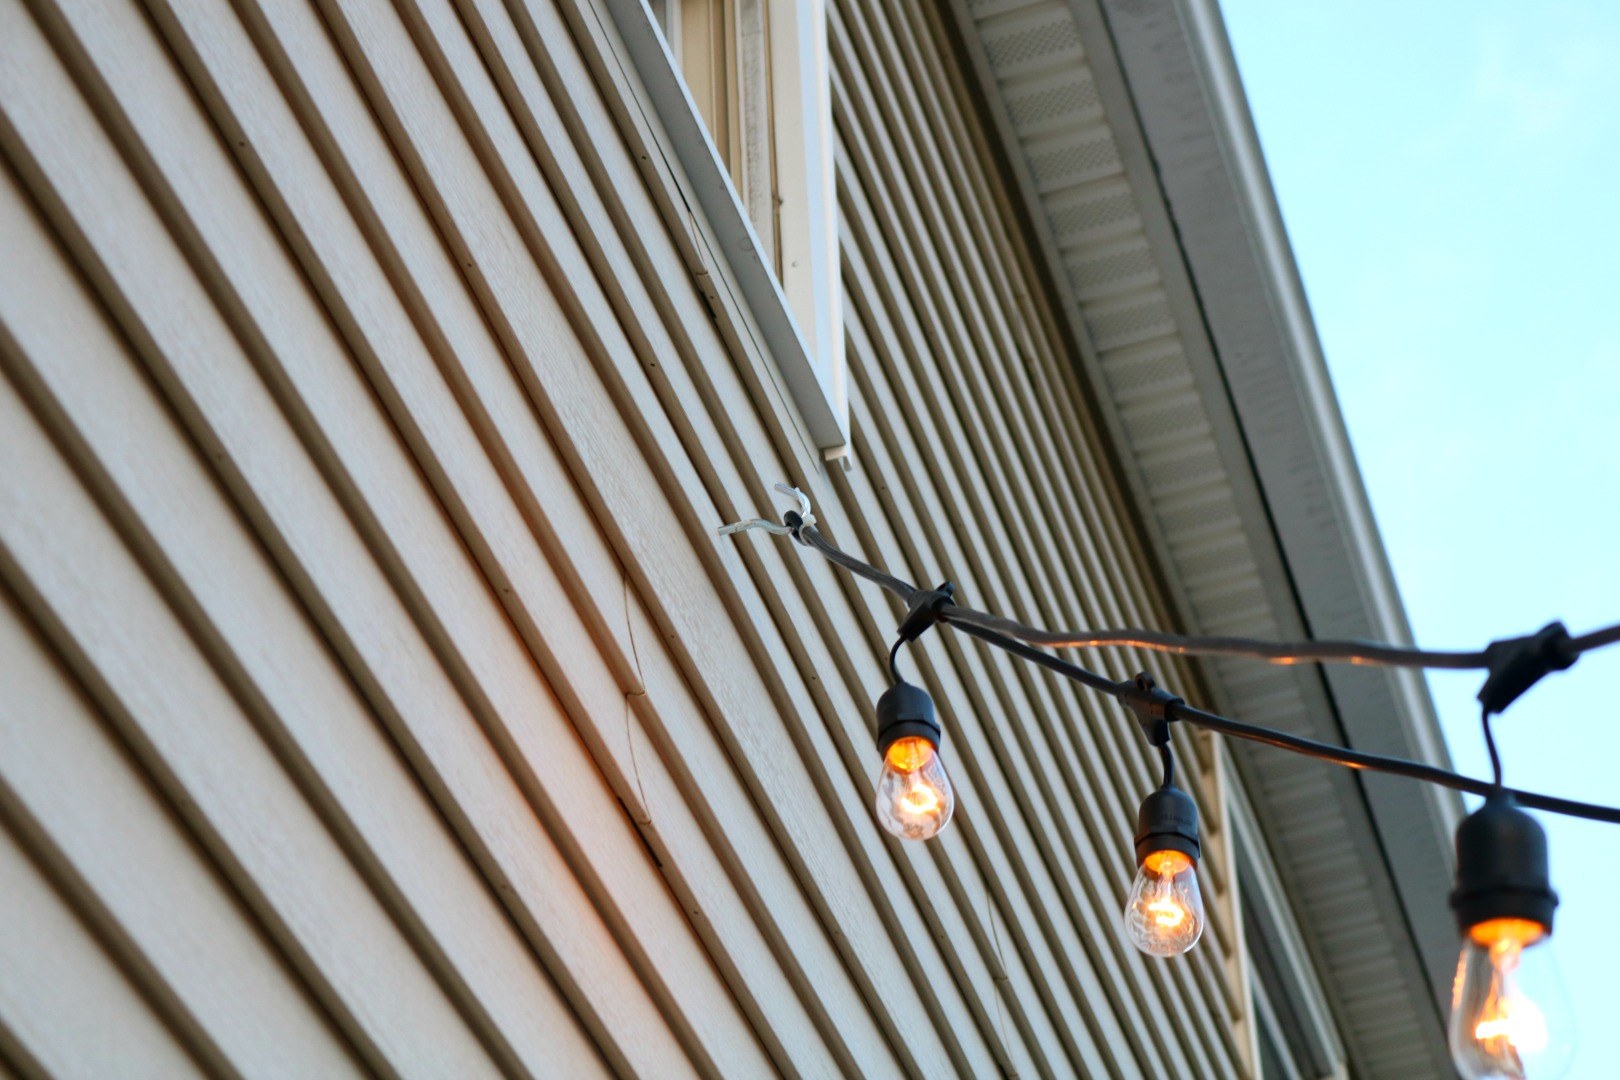 How to hang Outdoor Patio Lights and Privacy Screen